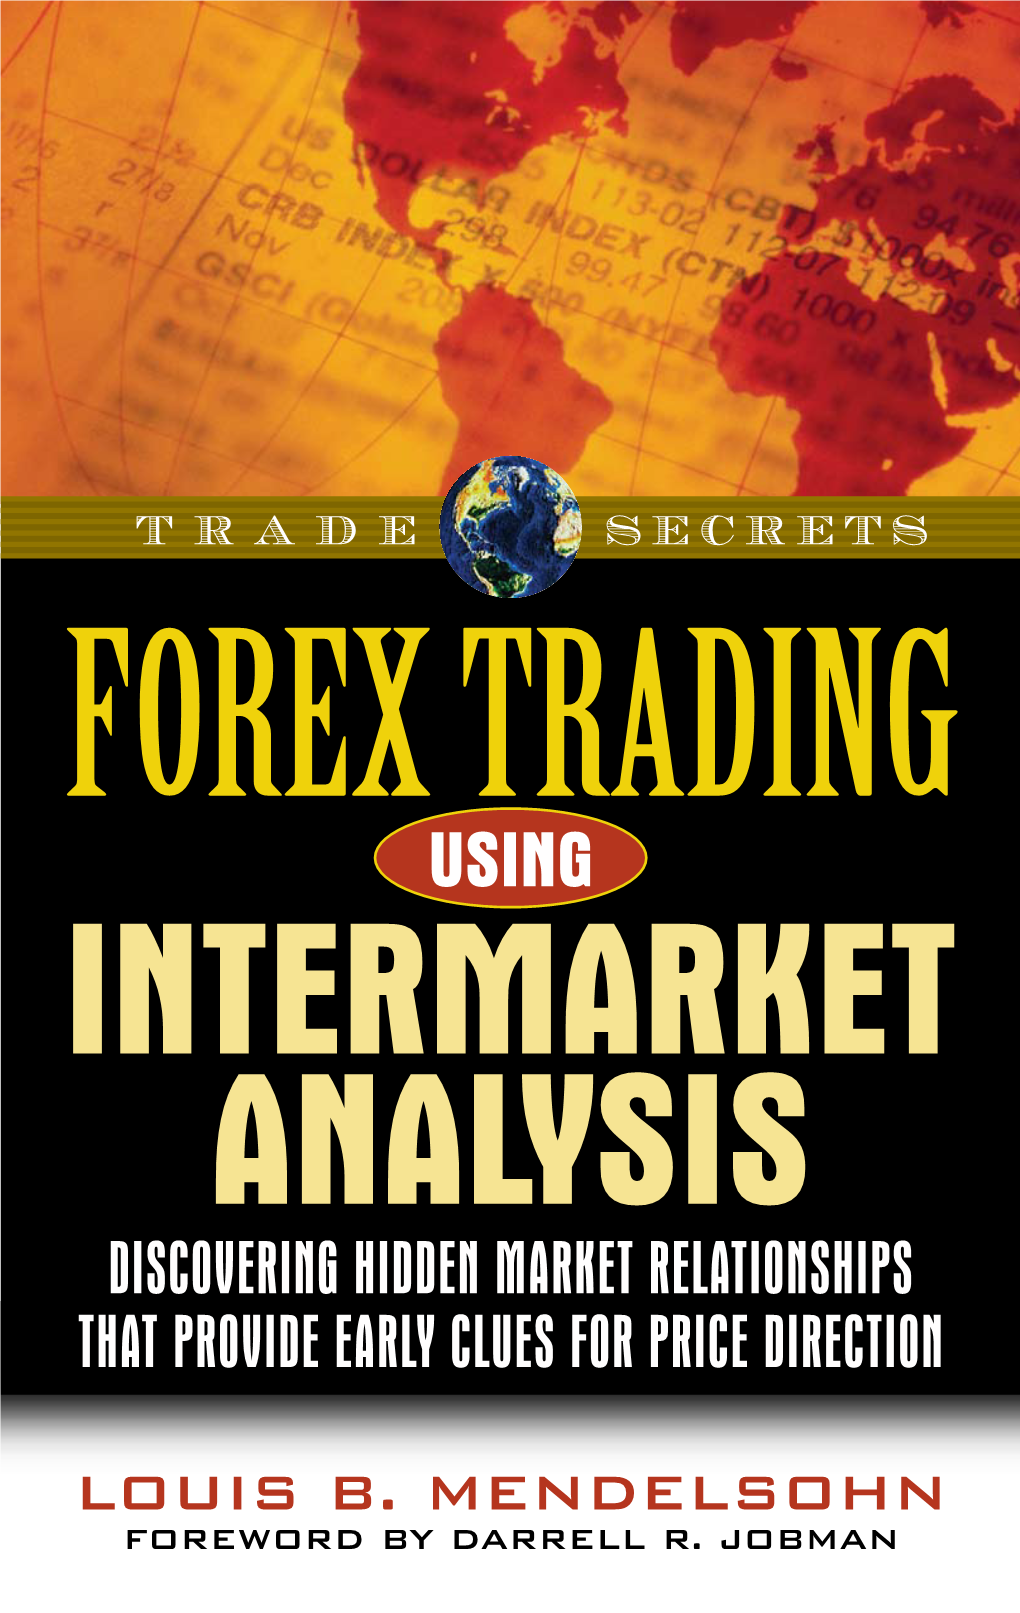 Forex Trading Using Intermarket Analysis Discovering Hidden Market Relationships That Provide Early Clues for Price Direction